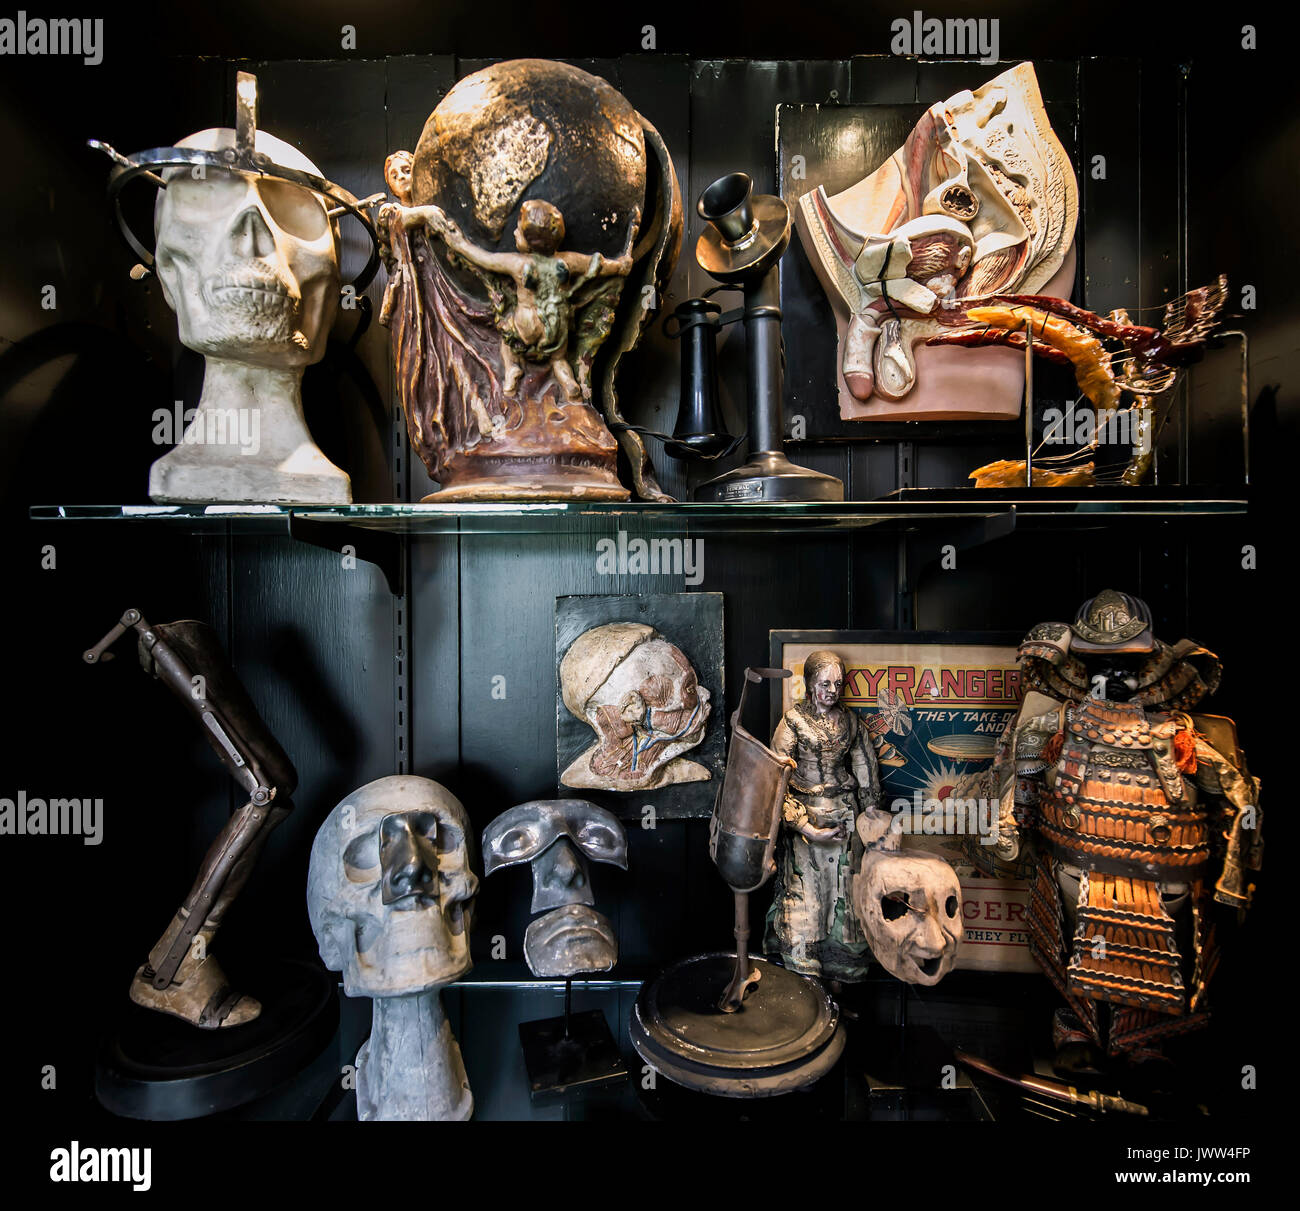 Aug.13, 2017 - Peekskill, New York, U.S. -  Early Electrics lighting showroom and museum features owner Steve Erenberg's large collection of early scientific equipment, medical objects and instruments, quackery, anatomical models and other offbeat esoterica. www.earlyelectrics.com(Credit Image: © Brian Cahn via ZUMA Wire) Stock Photo